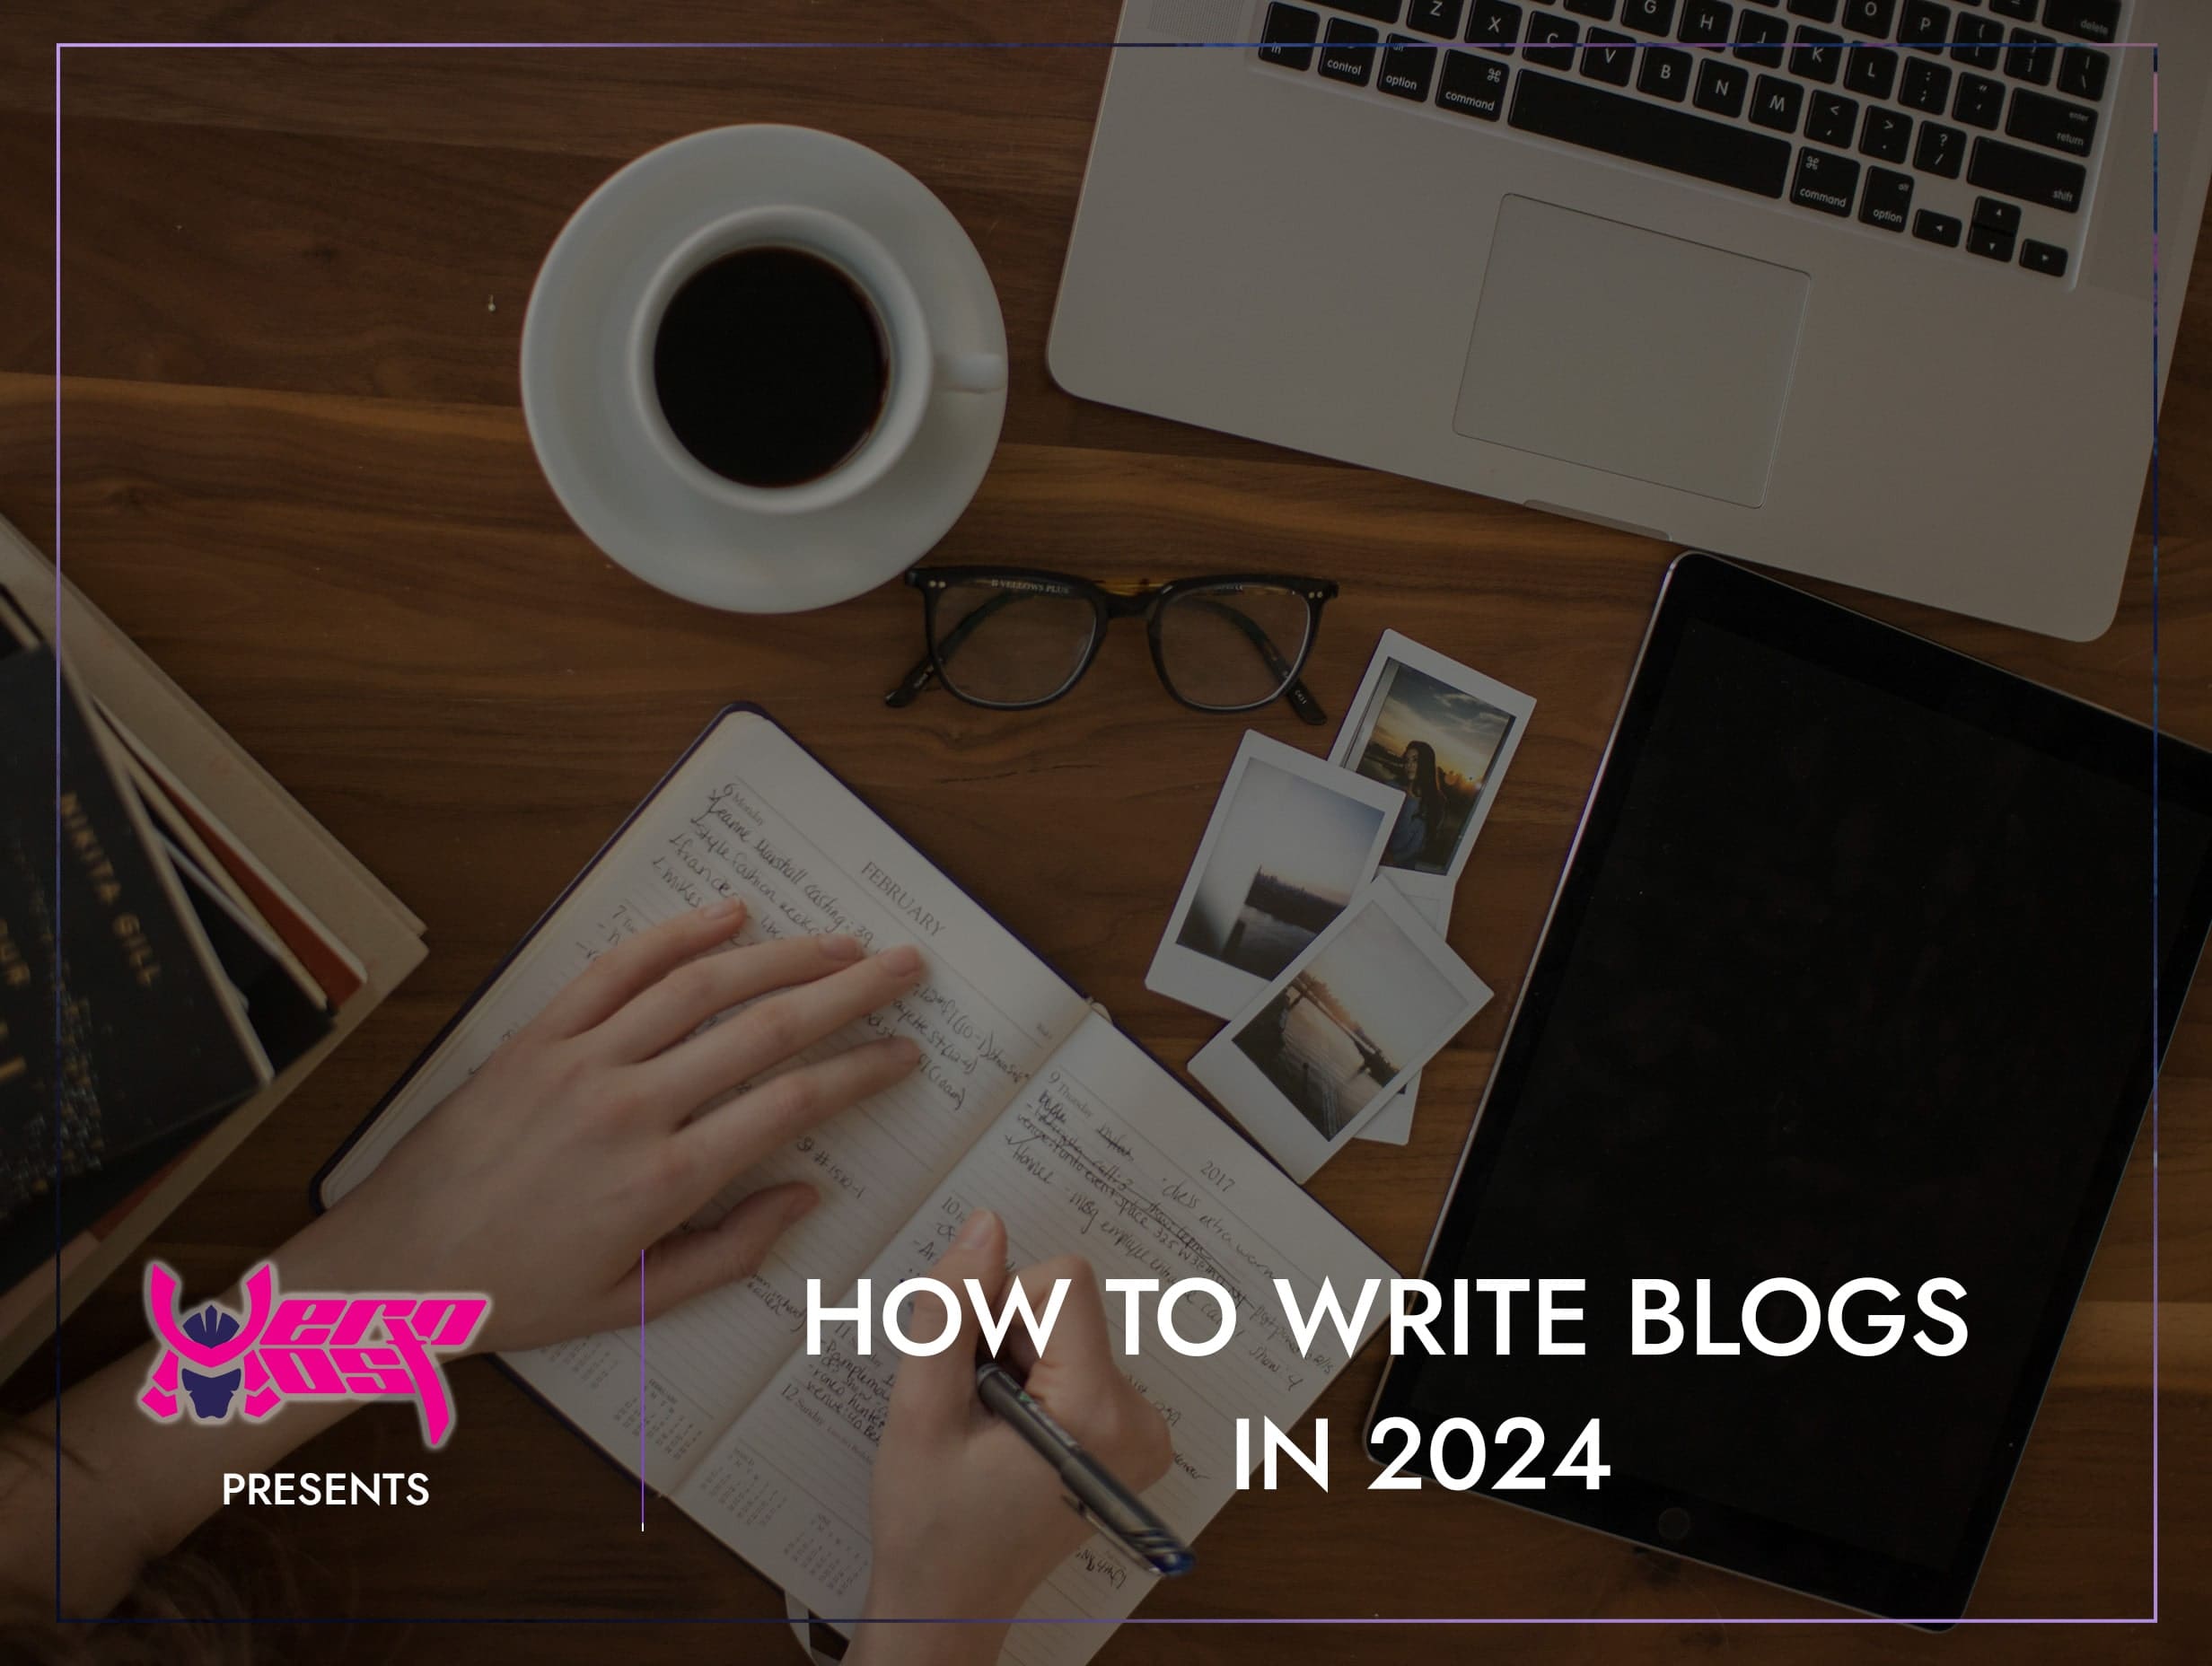 How to Write Blogs in 2024